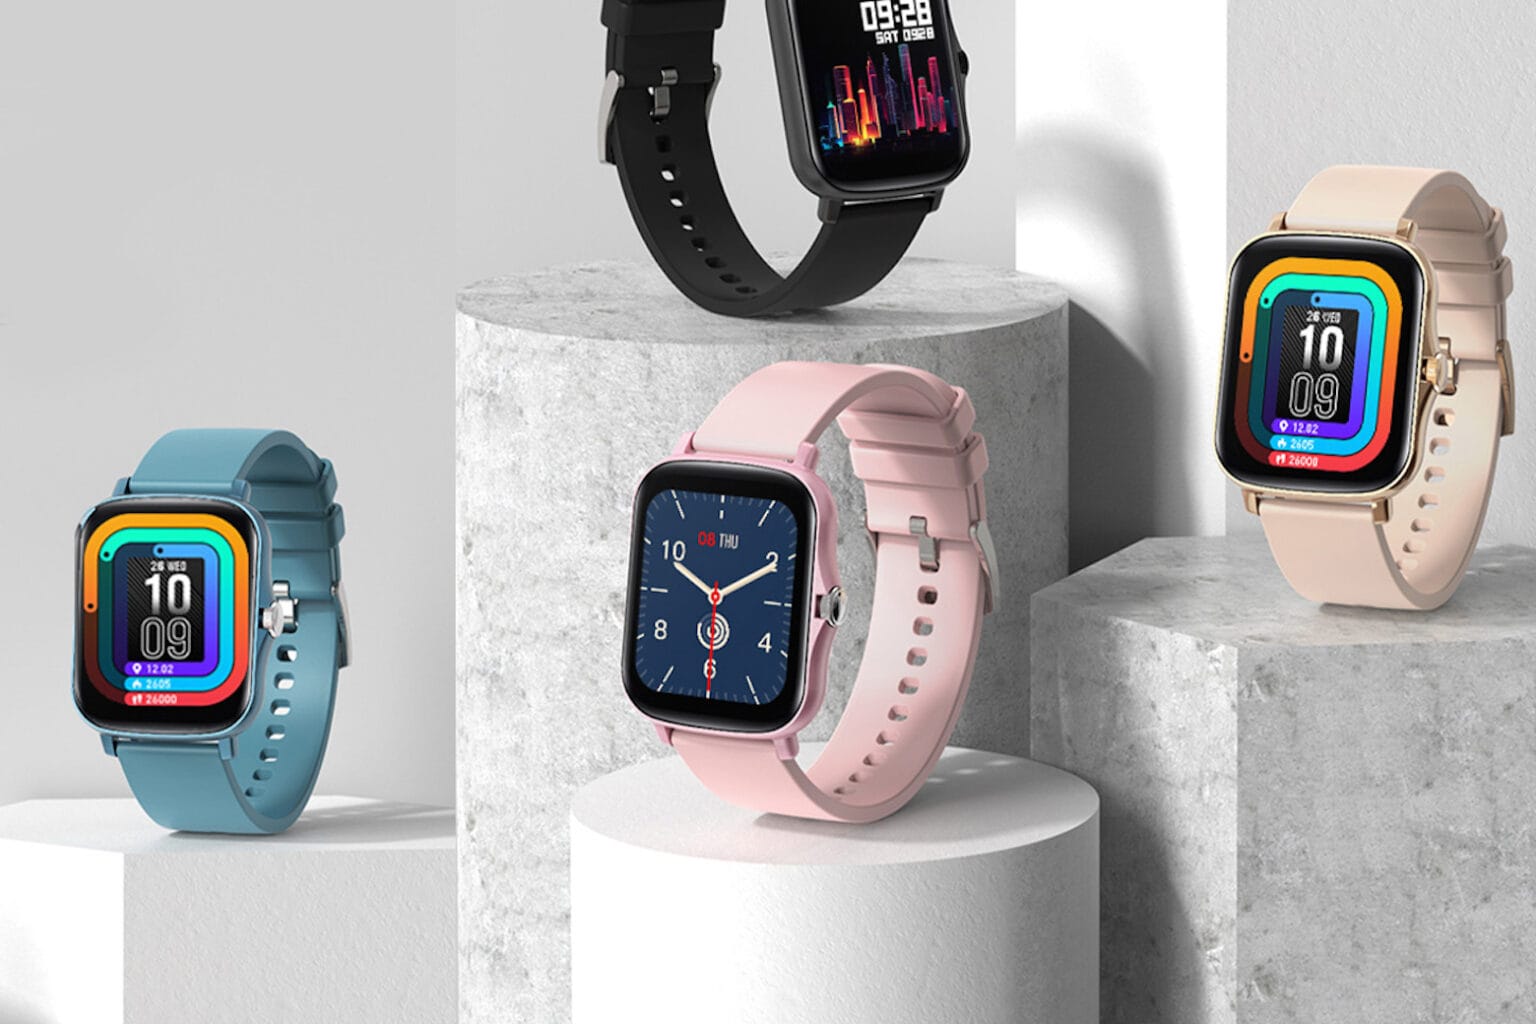 Watch out for this affordable Apple Watch alternative.